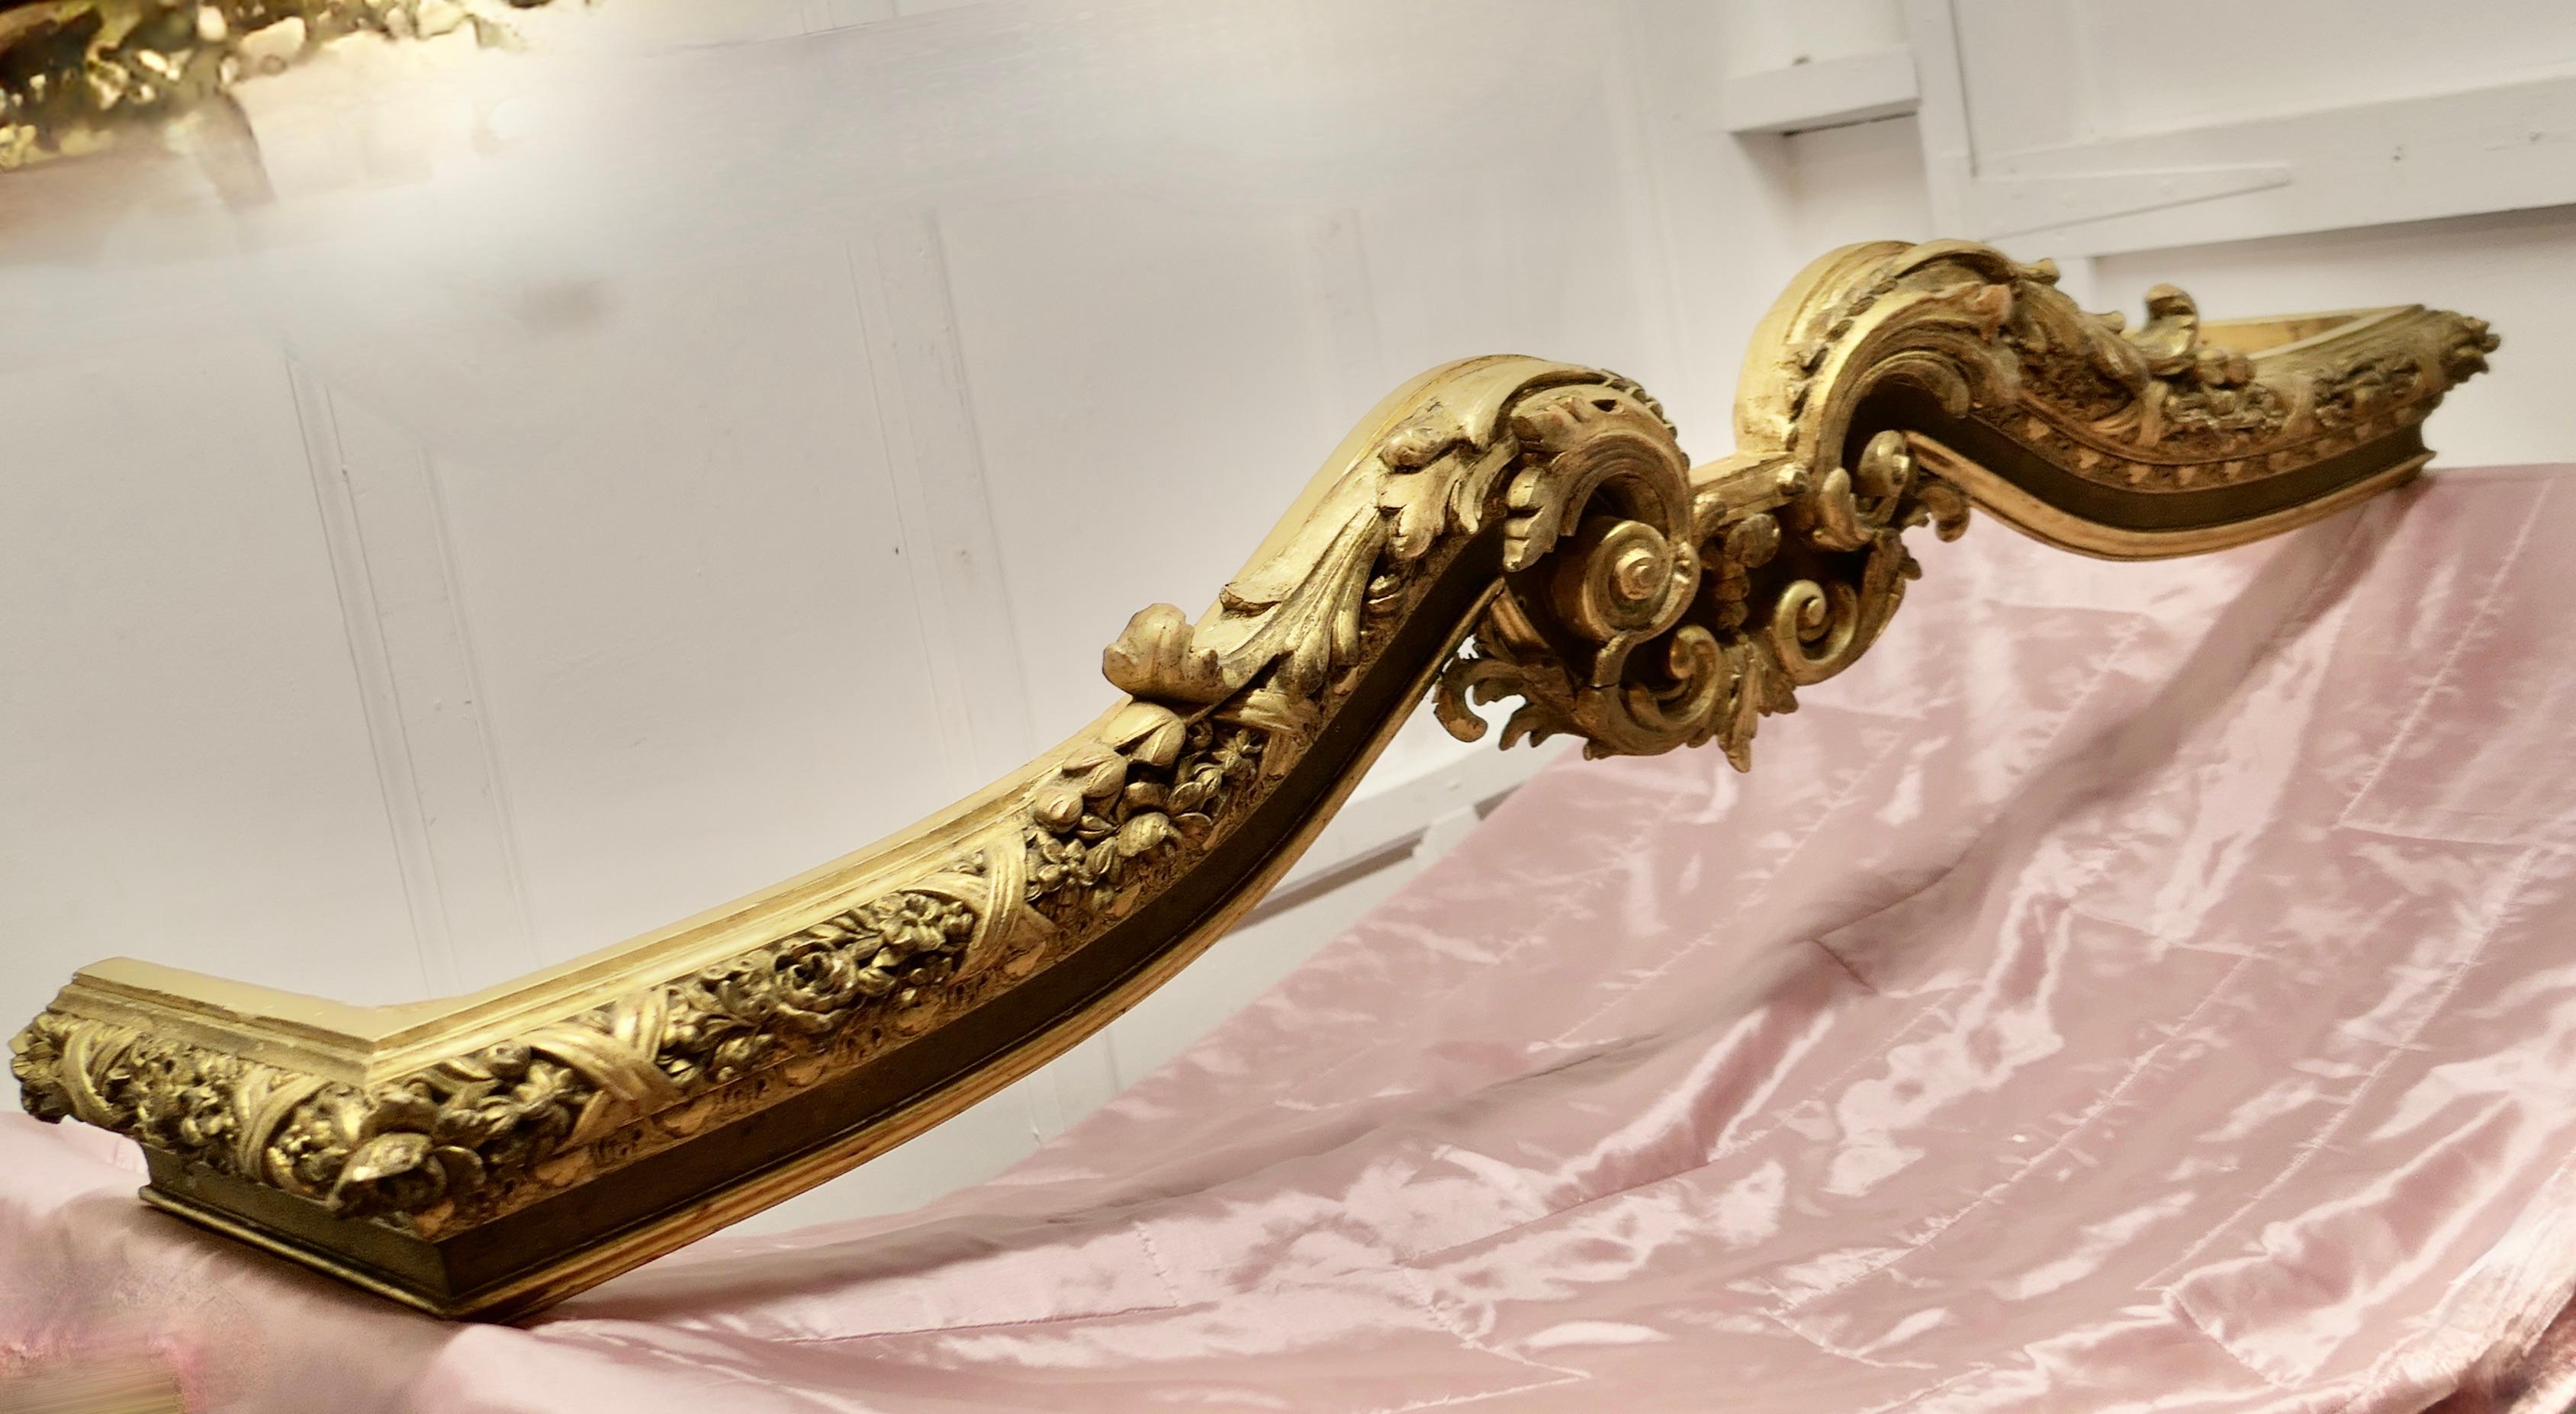 19th Century Giltwood Ciel de Lit Bed Canopy Corona

This Ciel de Lit is superbly carved and gilded, it has a stunning Swans Neck shape

The piece is in very good condition with a lovely patina and rich colour, on the inside there are the original